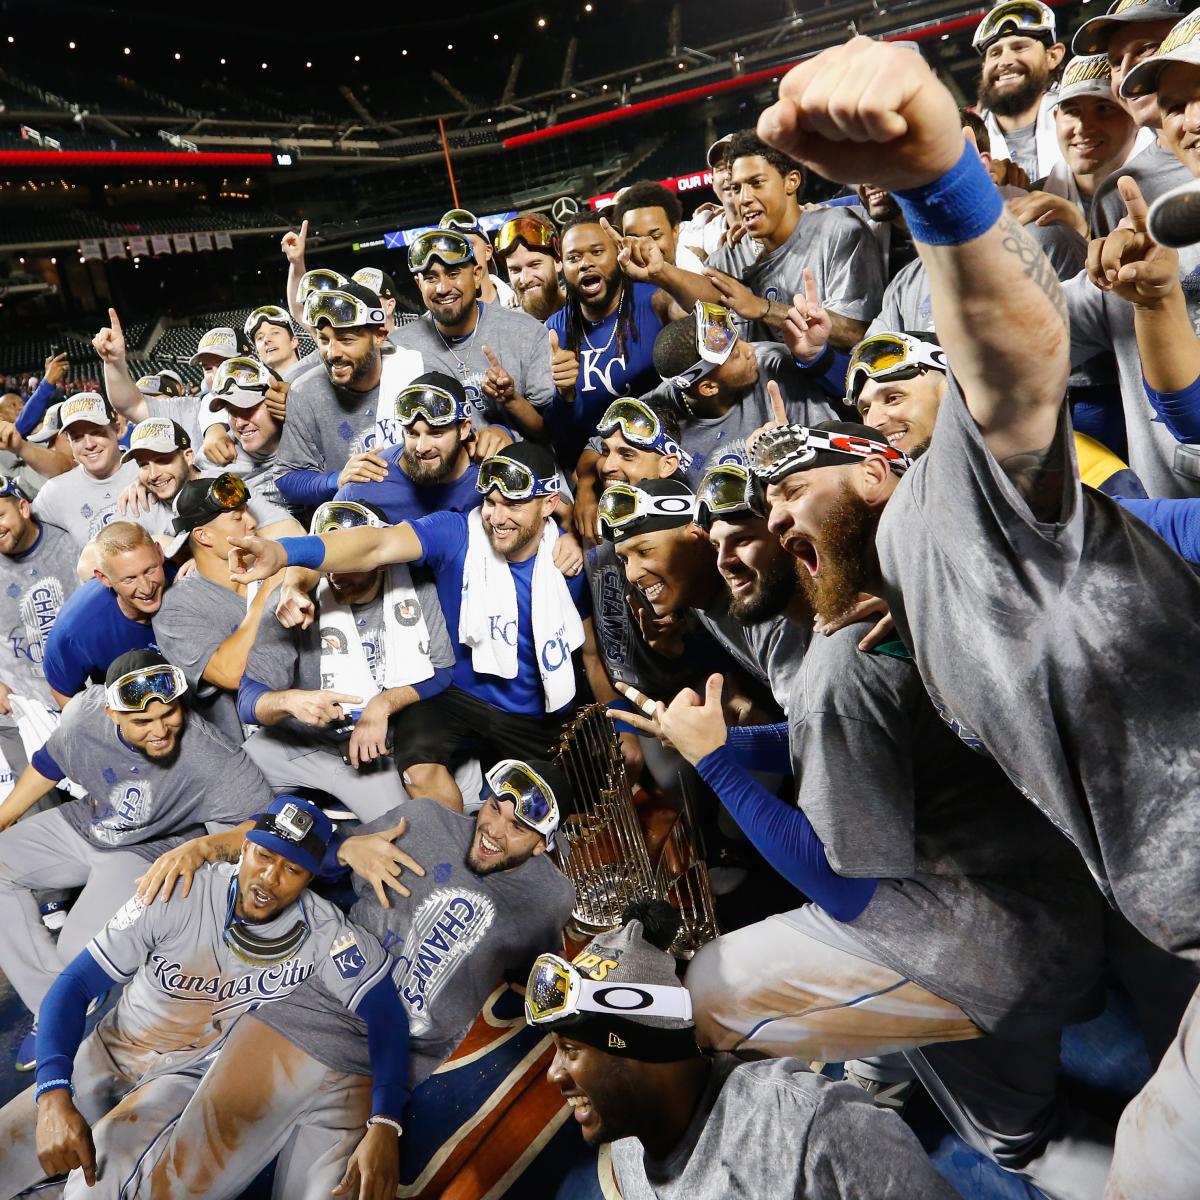 VIDEO: Relive the KC Royals World Series parade